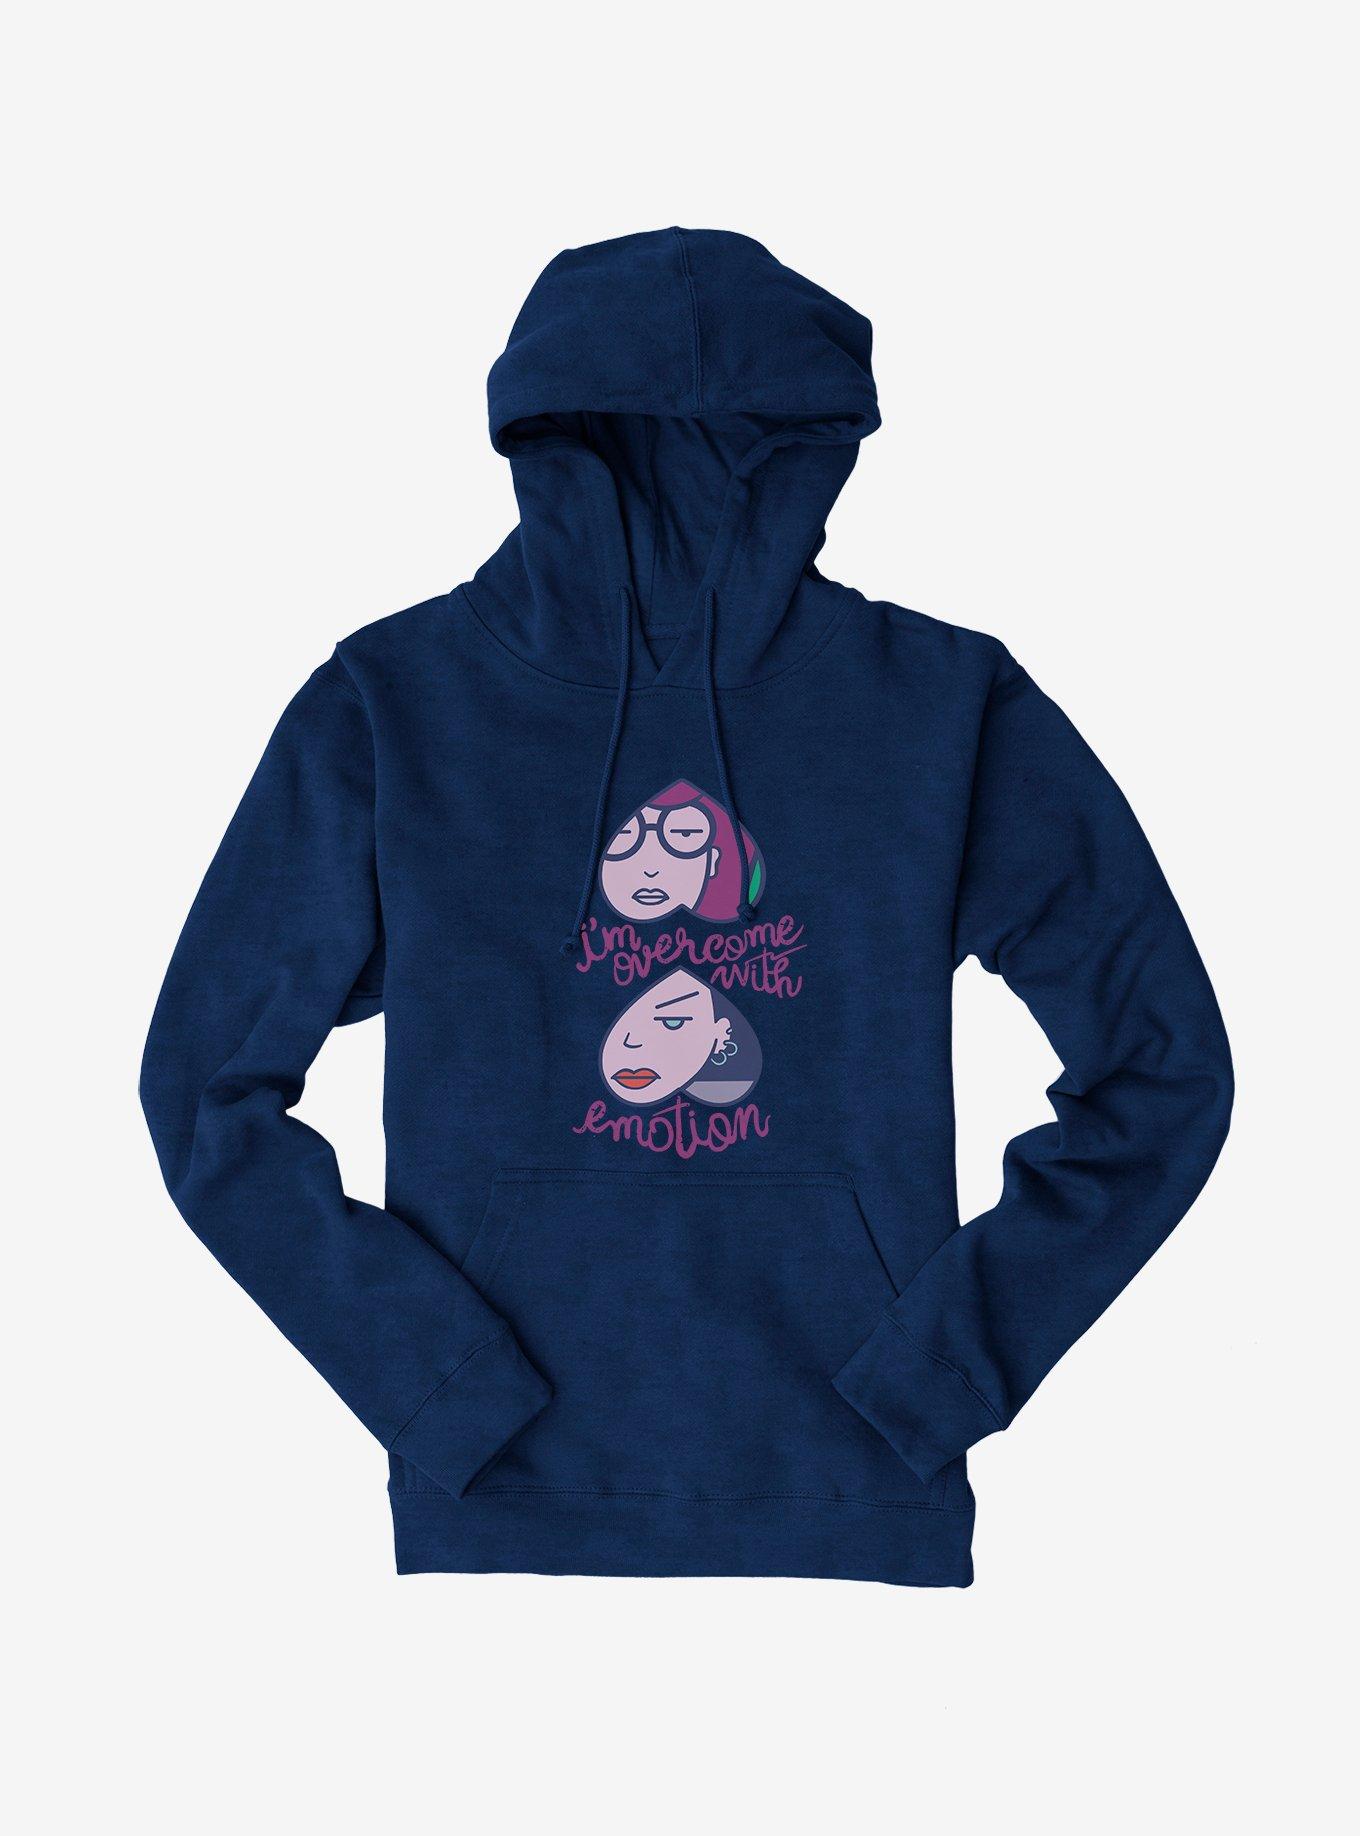 Daria Overcome with Emotion BFF Hearts Hoodie